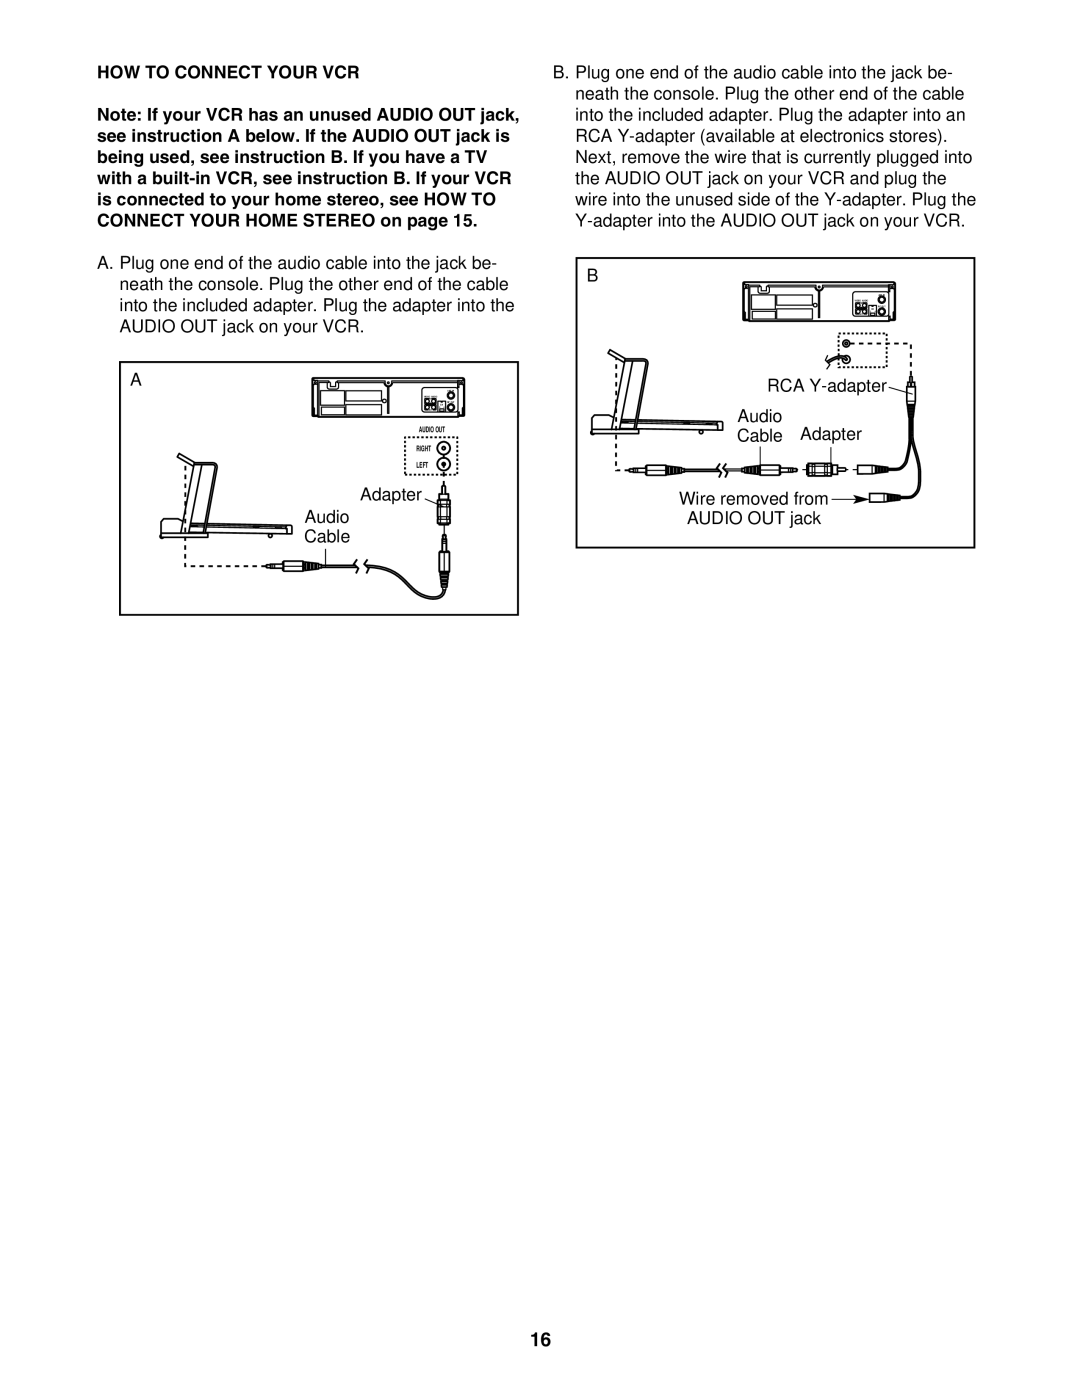 Image IMTL39526 user manual HOW to Connect Your VCR, Adapter Audio Cable 